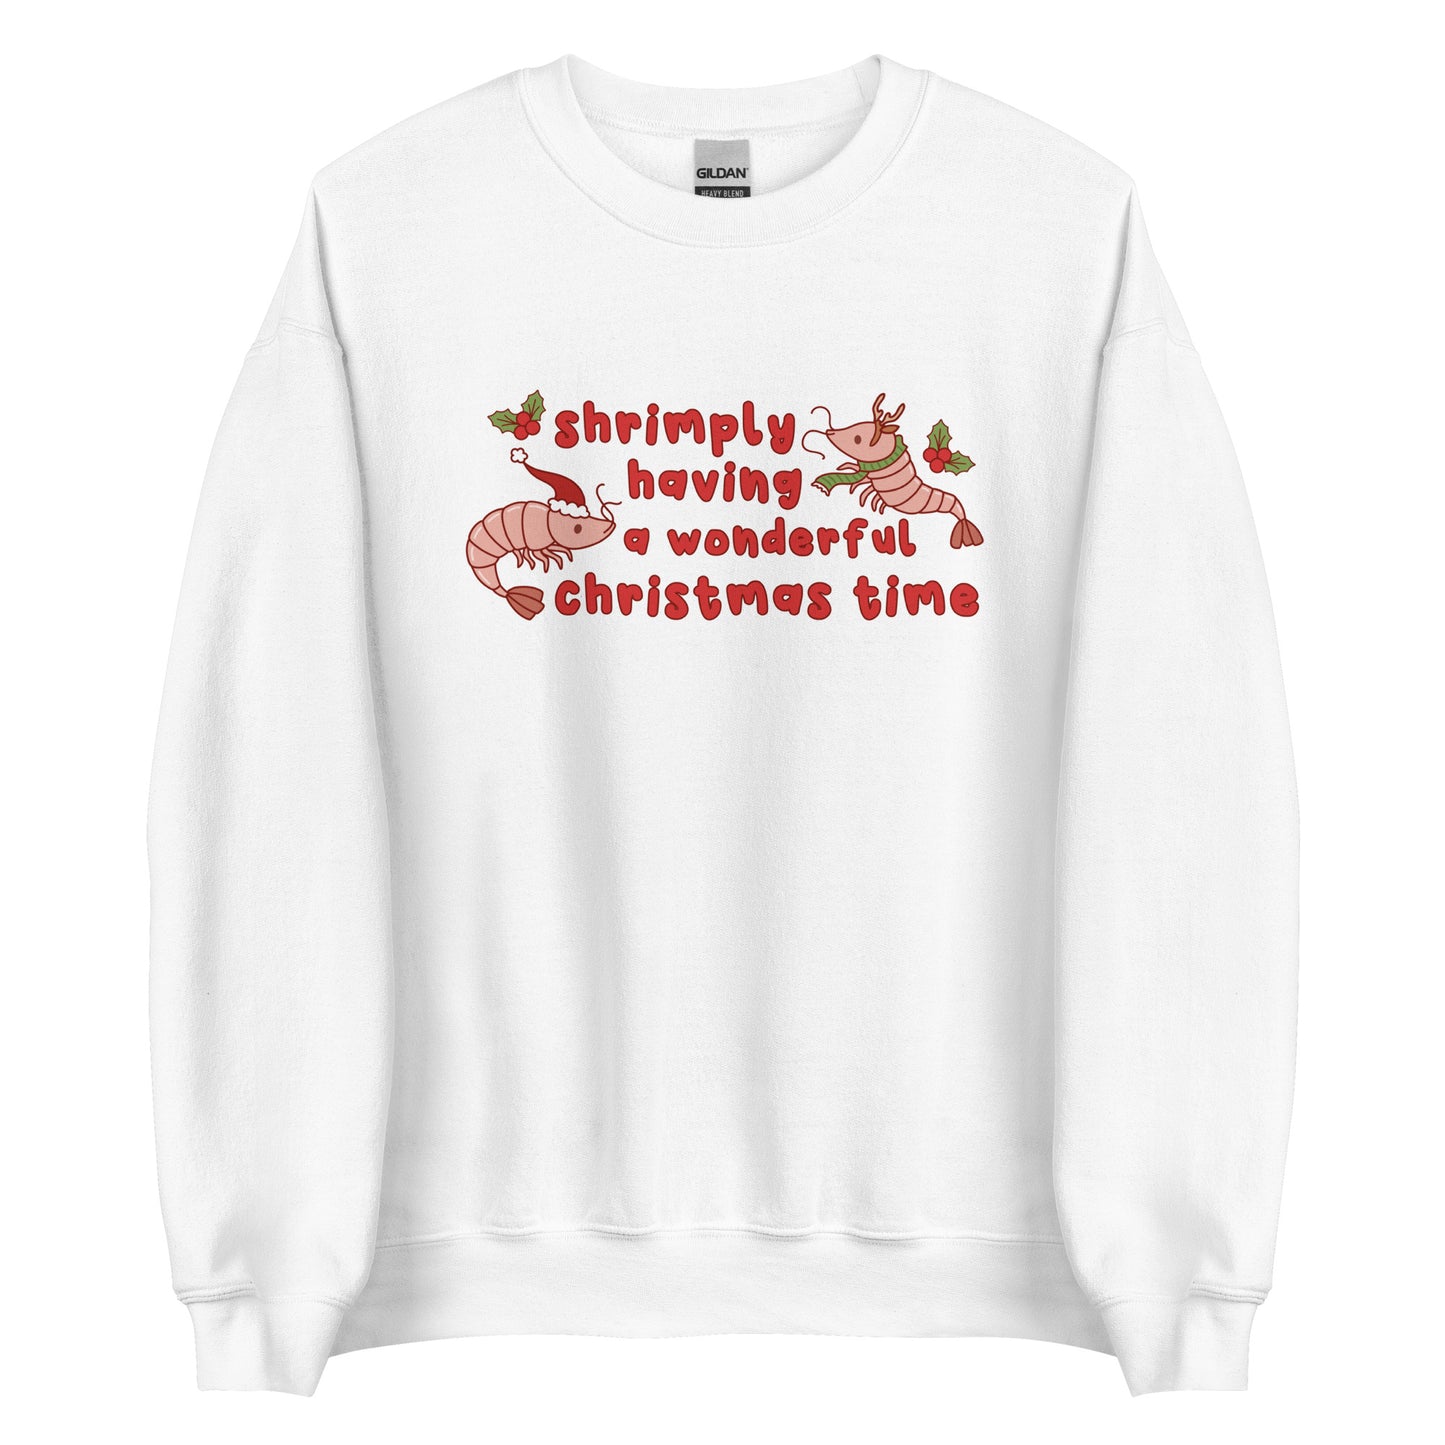 A white crewneck sweatshirt featuring an illustration of two festive shrimp - one with a Santa hat, and one with reindeer antlers. Text between the shrimp reads "shrimply having a wonderful Christmas time".